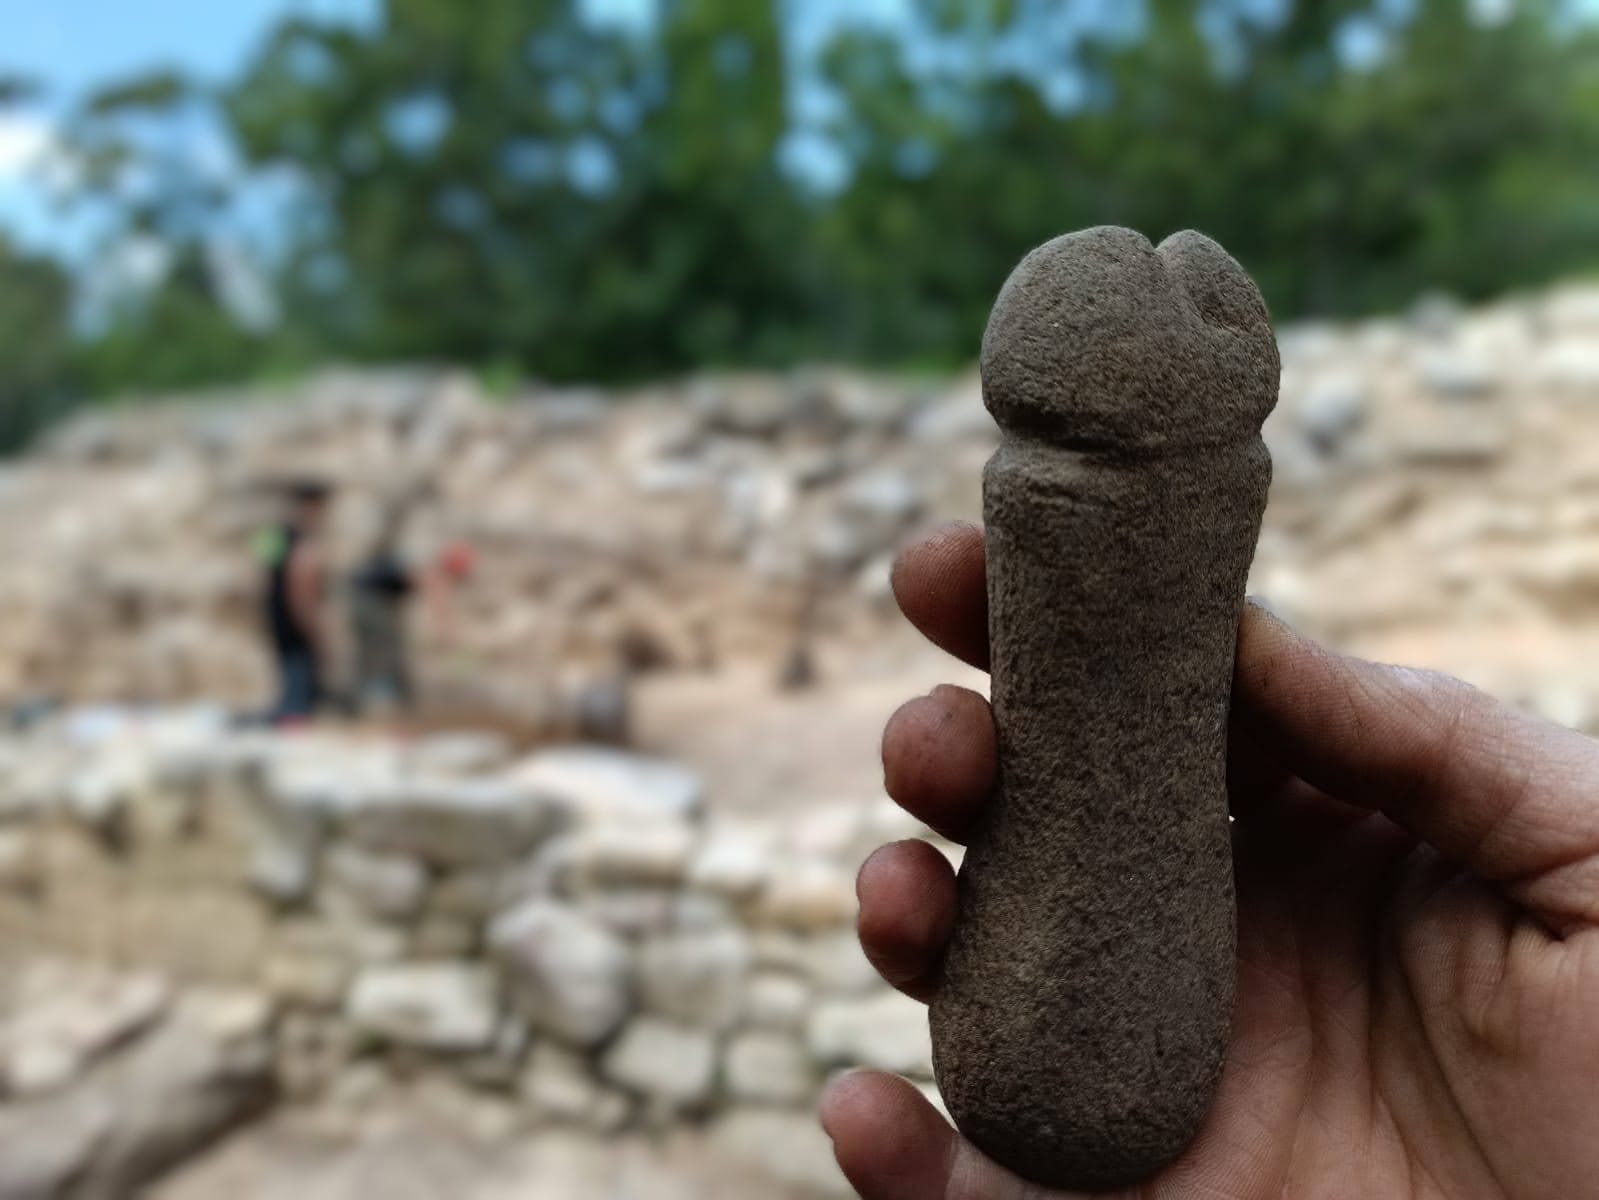 A hand holds a stone, penis-shaped object.